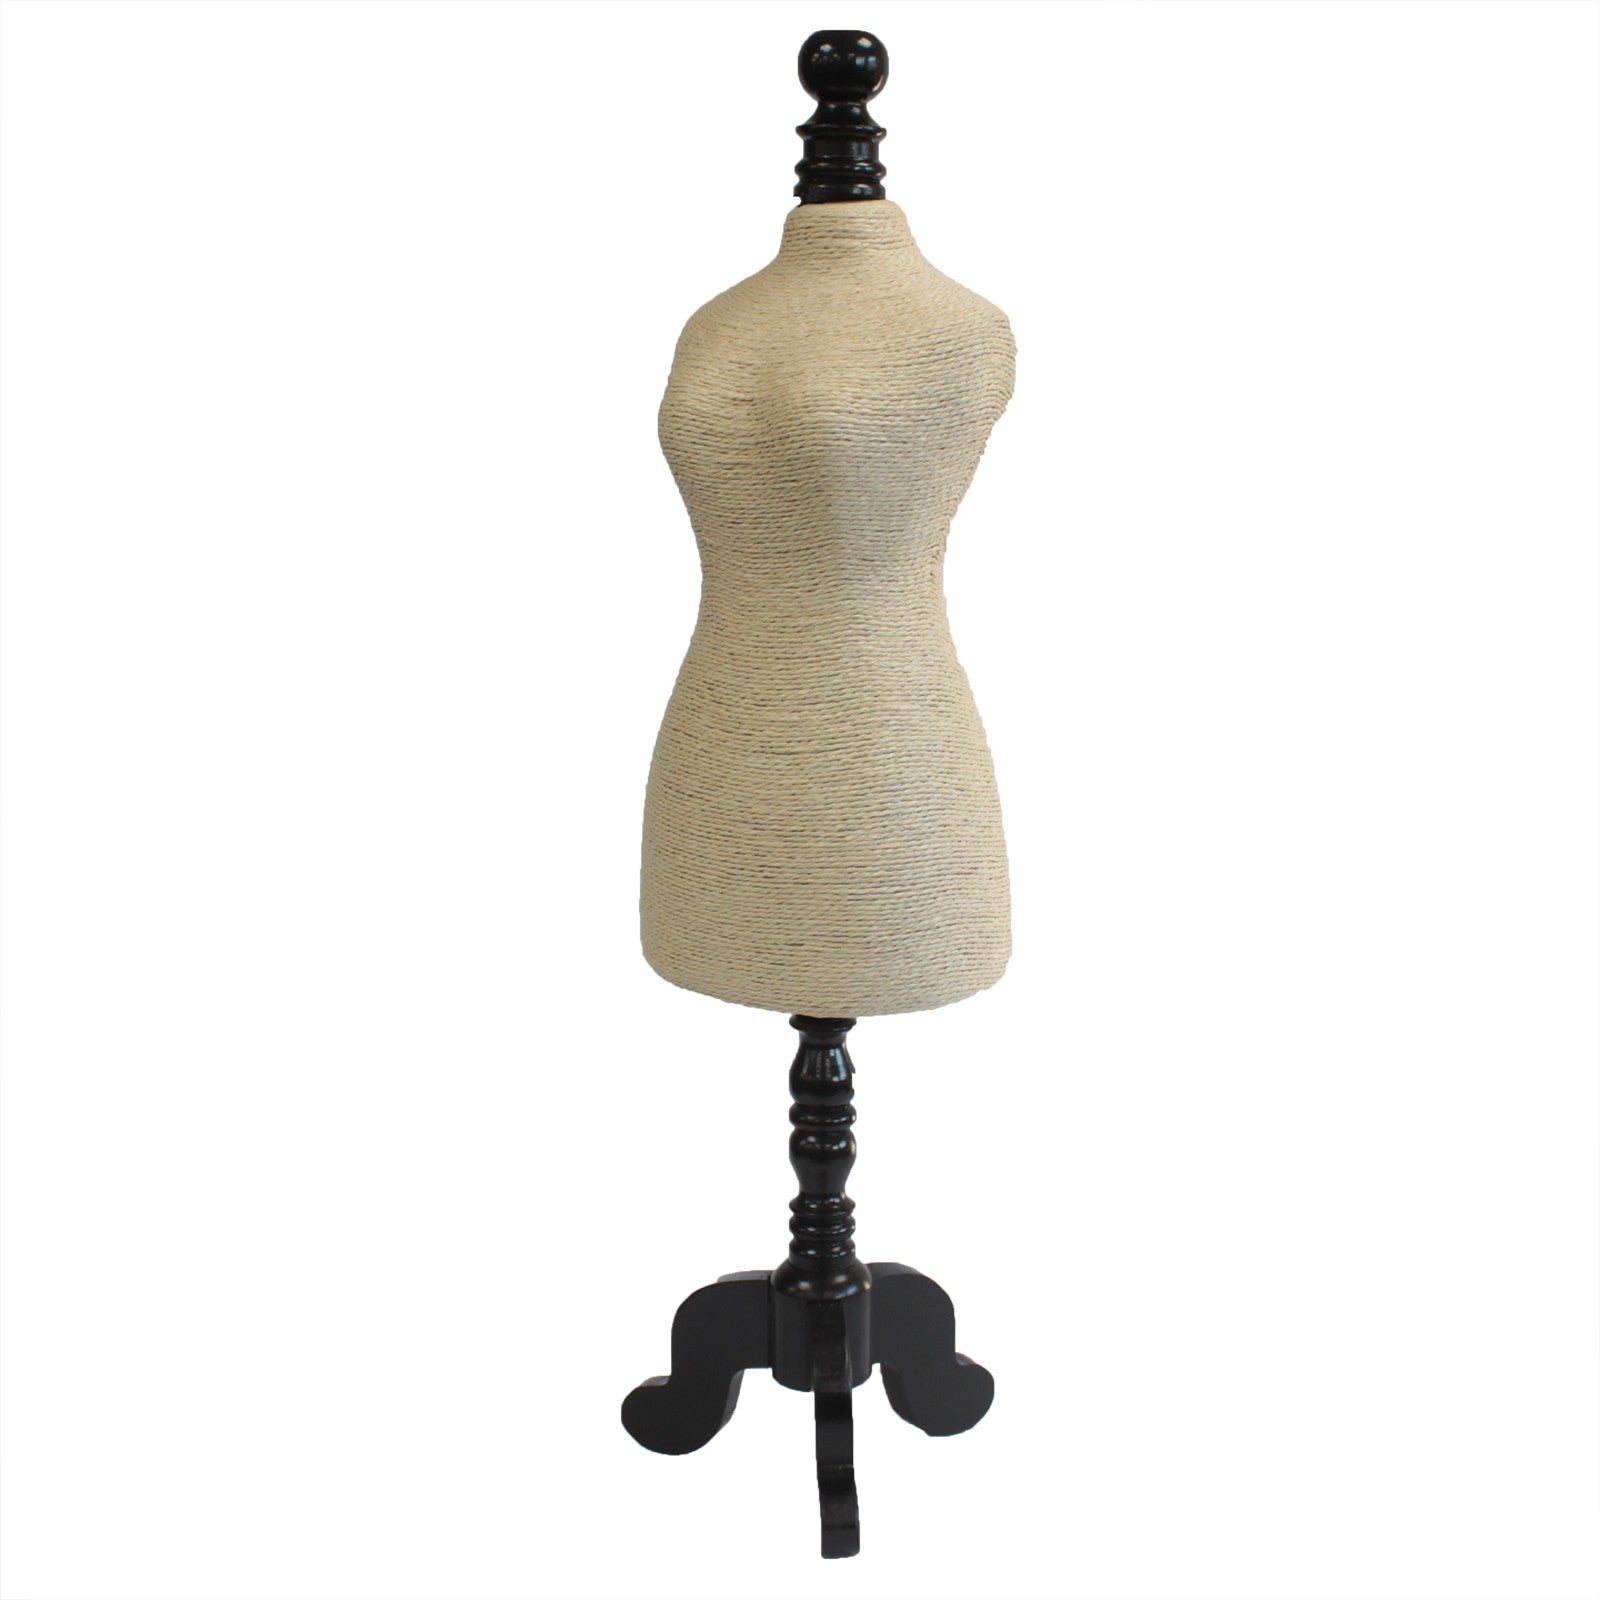 View Natural Jewellery Display Mannequin on Wooden Stand Cream information